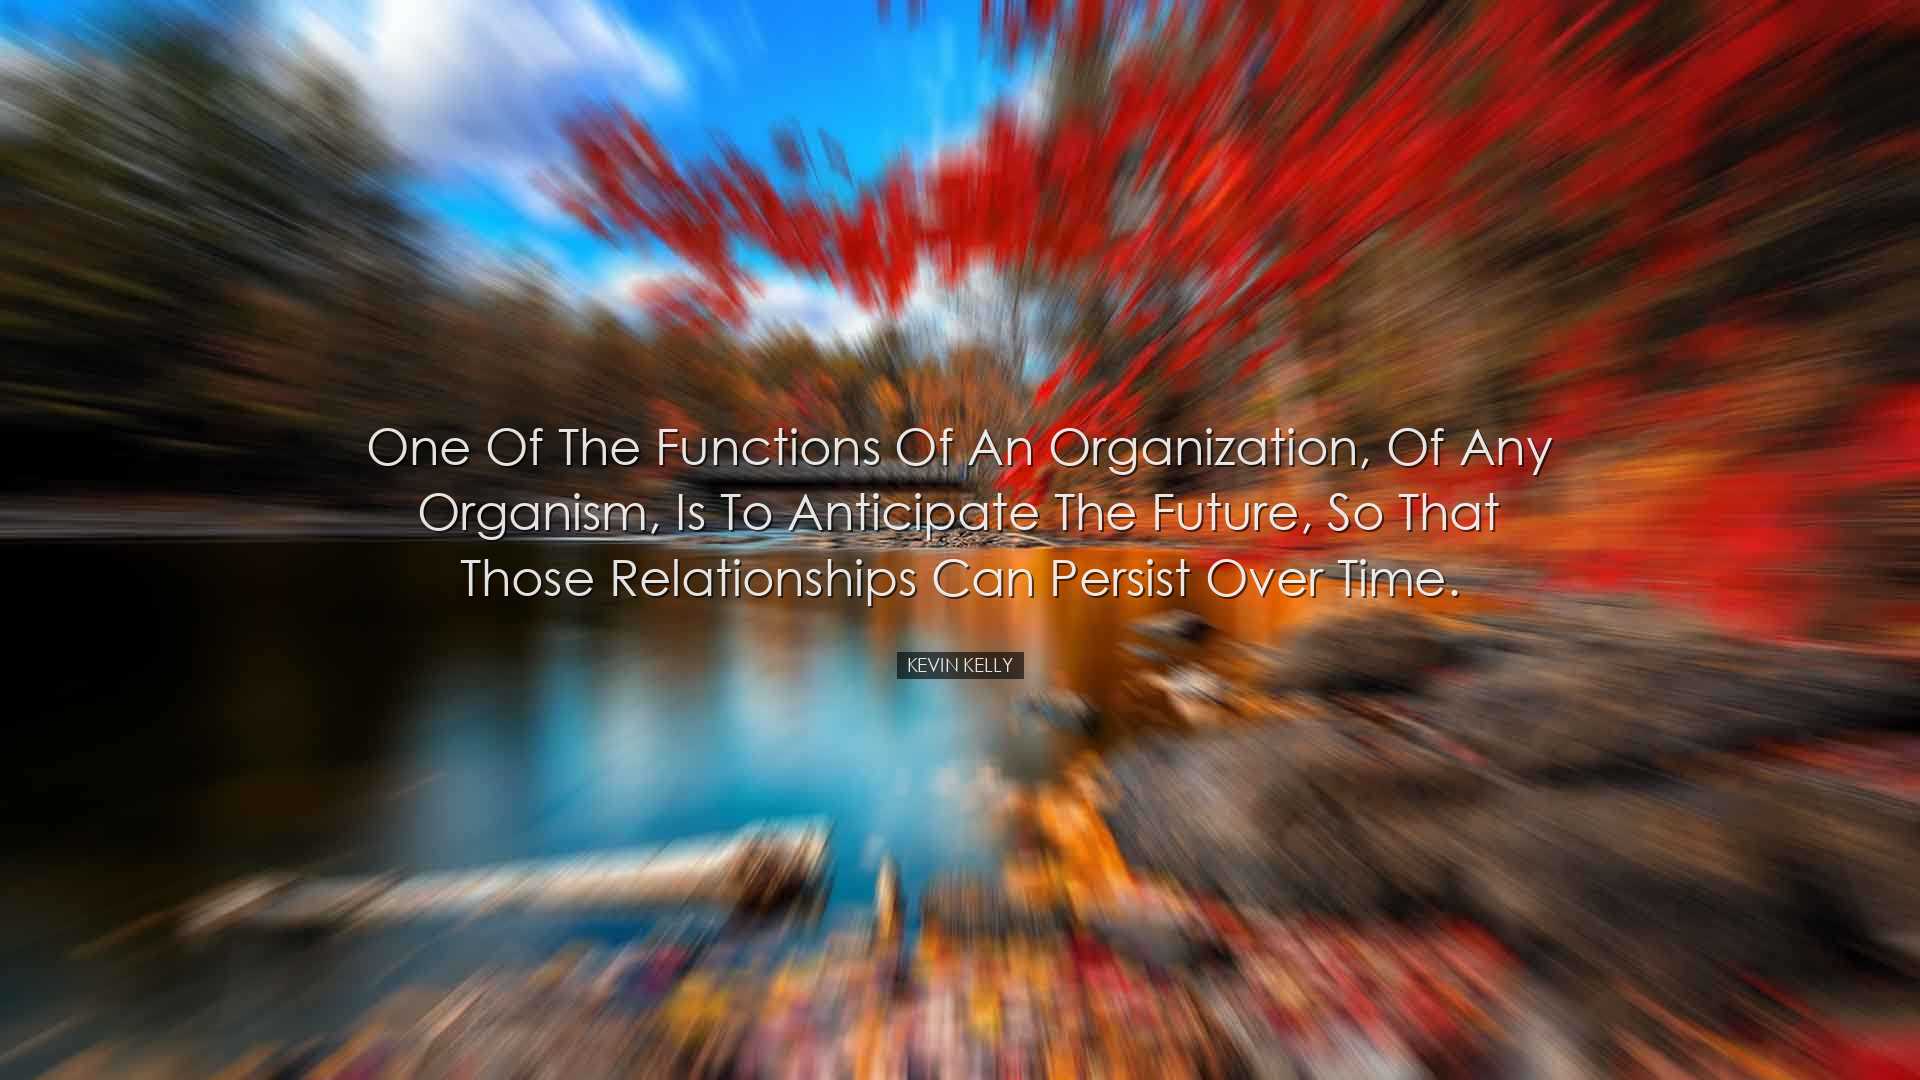 One of the functions of an organization, of any organism, is to an